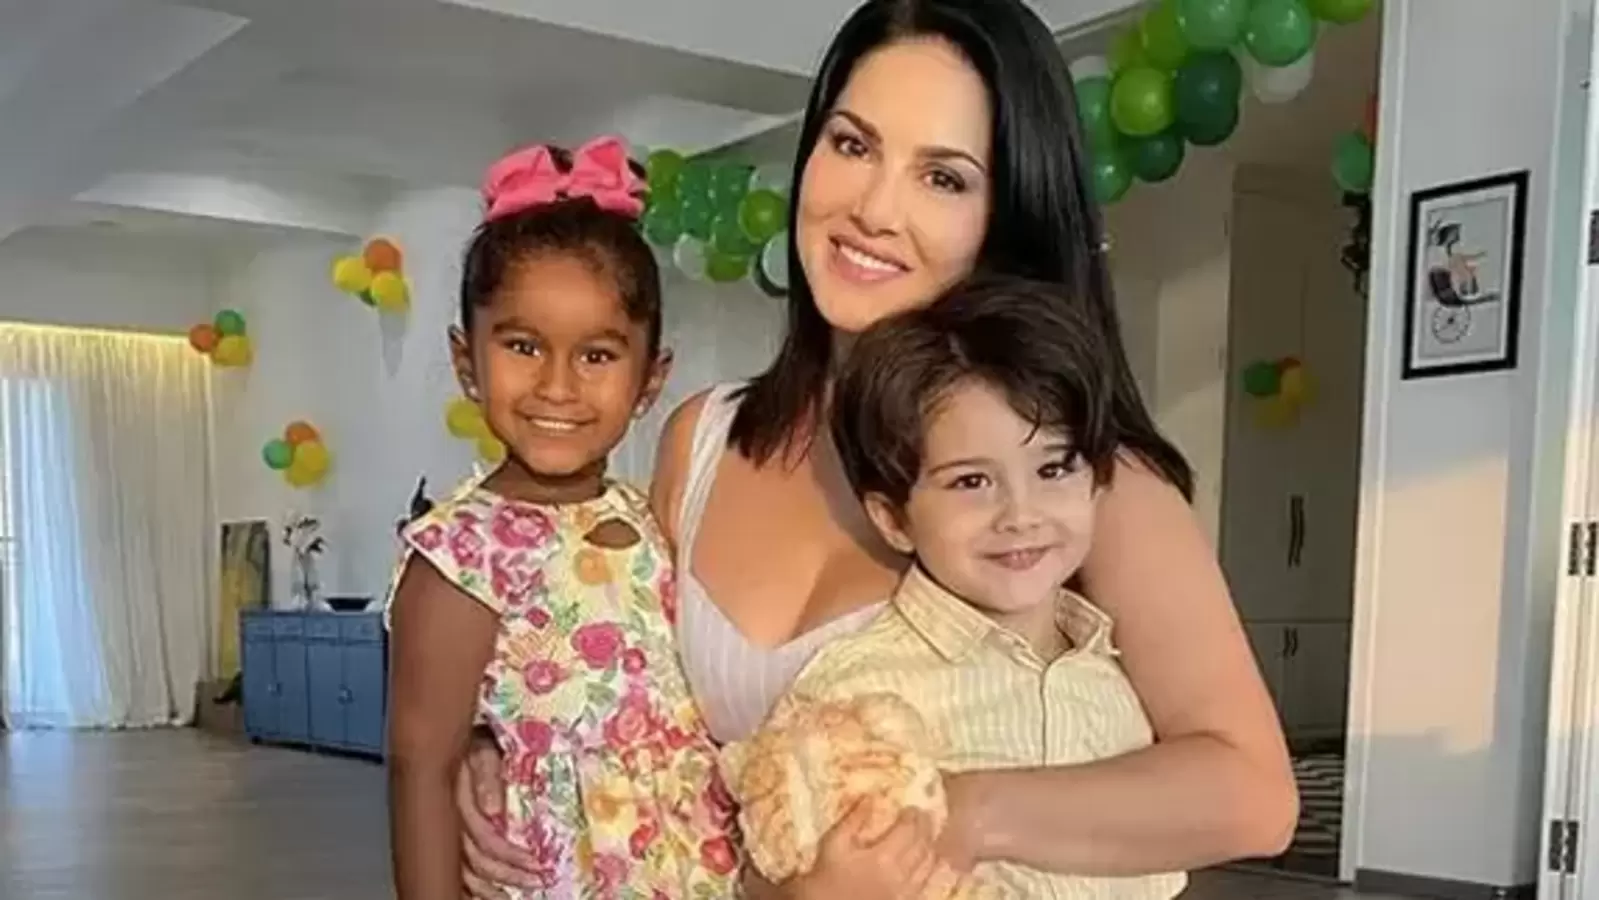 Sunny Leone slams trolls claiming she adopted daughter for publicity: ‘It’s childish, ridiculous. Grow up!’